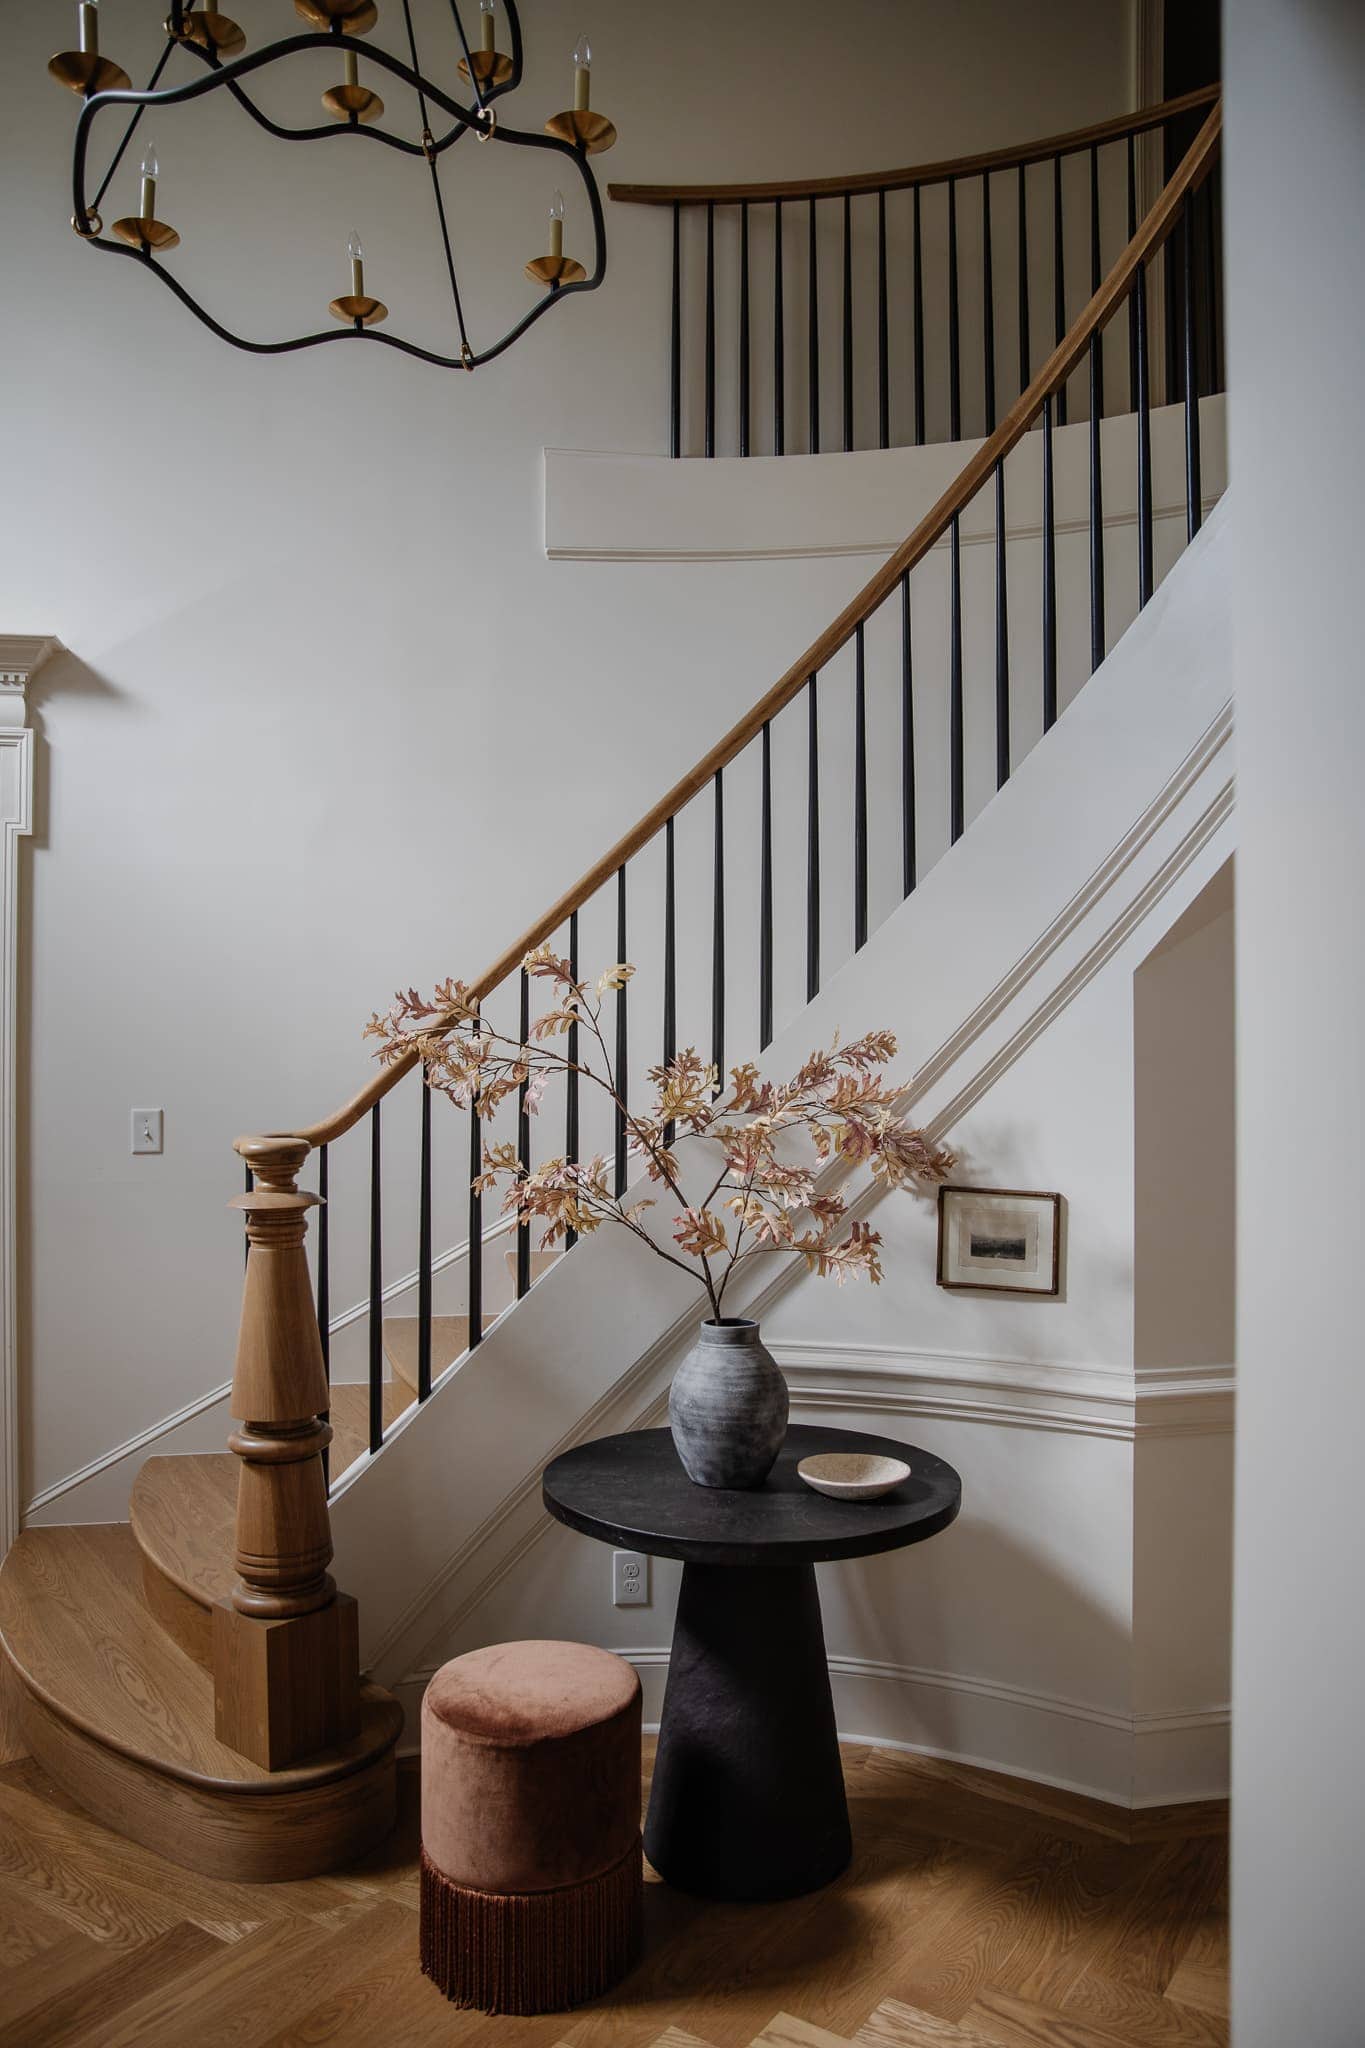 Traditional staircase with side table in timeless decor style featured in "Timeless vs. Trendy Decor" 